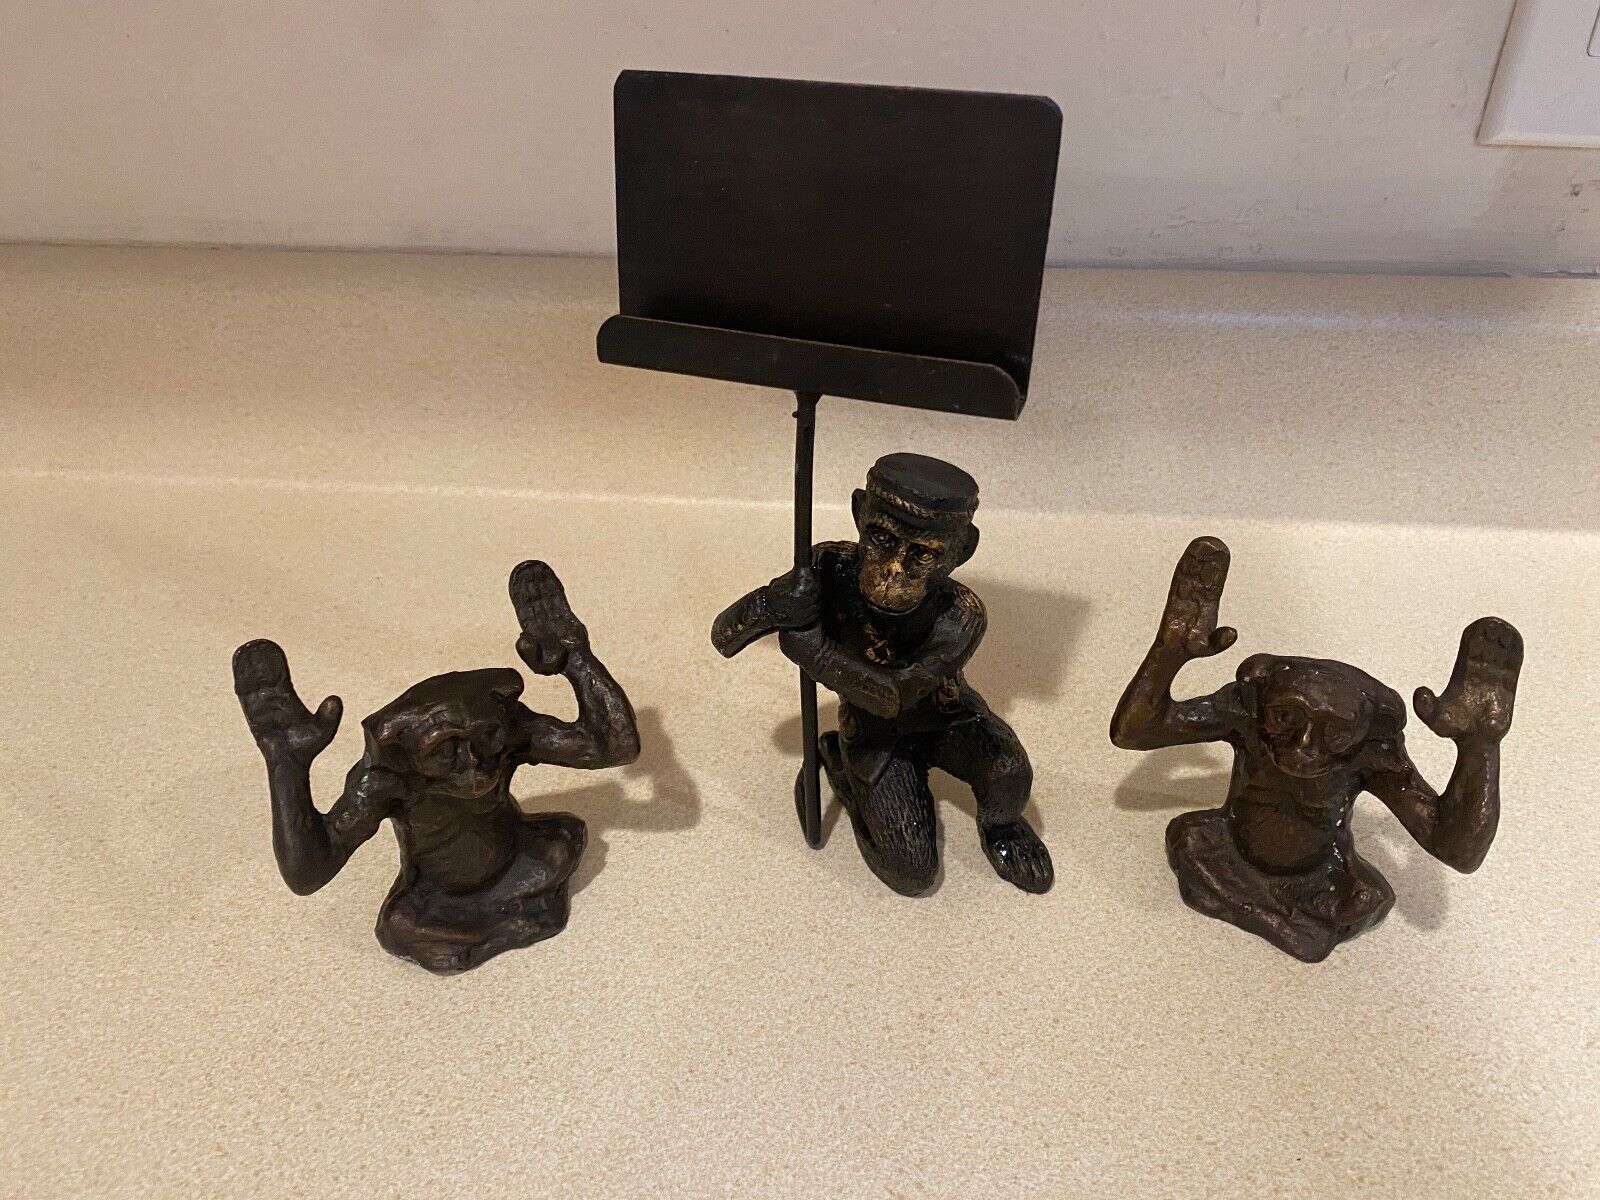 Cast Iron Bell Hop Monkey Business Card Holder Collectible Set of 3 monkey